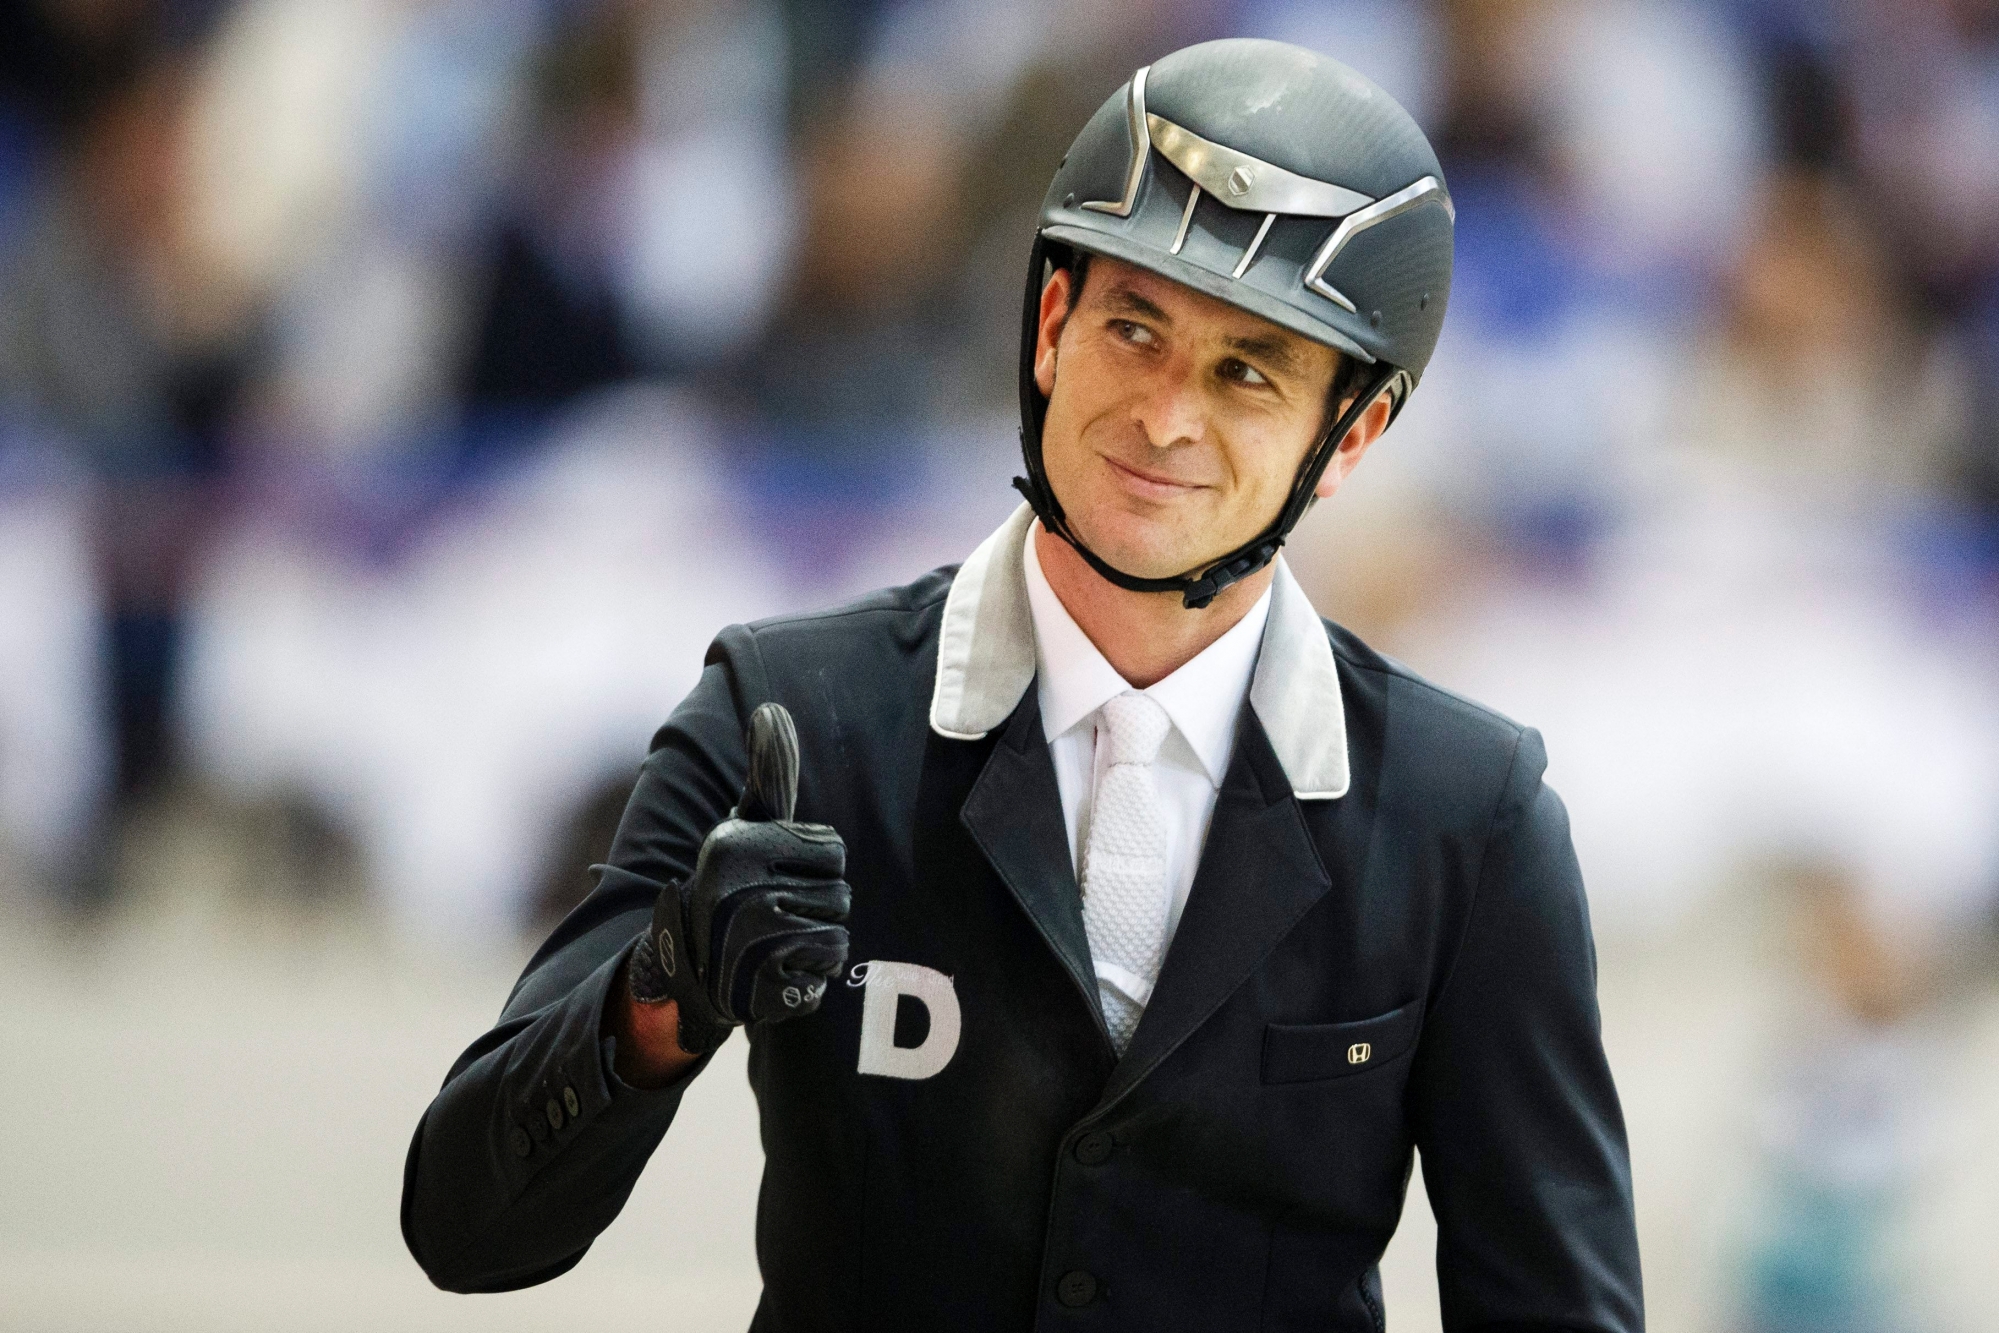 Steve Guerdat from Switzerland reacts after riding his horse Nino des Buissonnets to win the first place of the Rolex Grand Prix of show jumping at the 55th CHI international horse show jumping tournament in Geneva, Switzerland, on Sunday, December 13, 2015. (KEYSTONE/Valentin Flauraud) SWITZERLAND CHI GENEVA